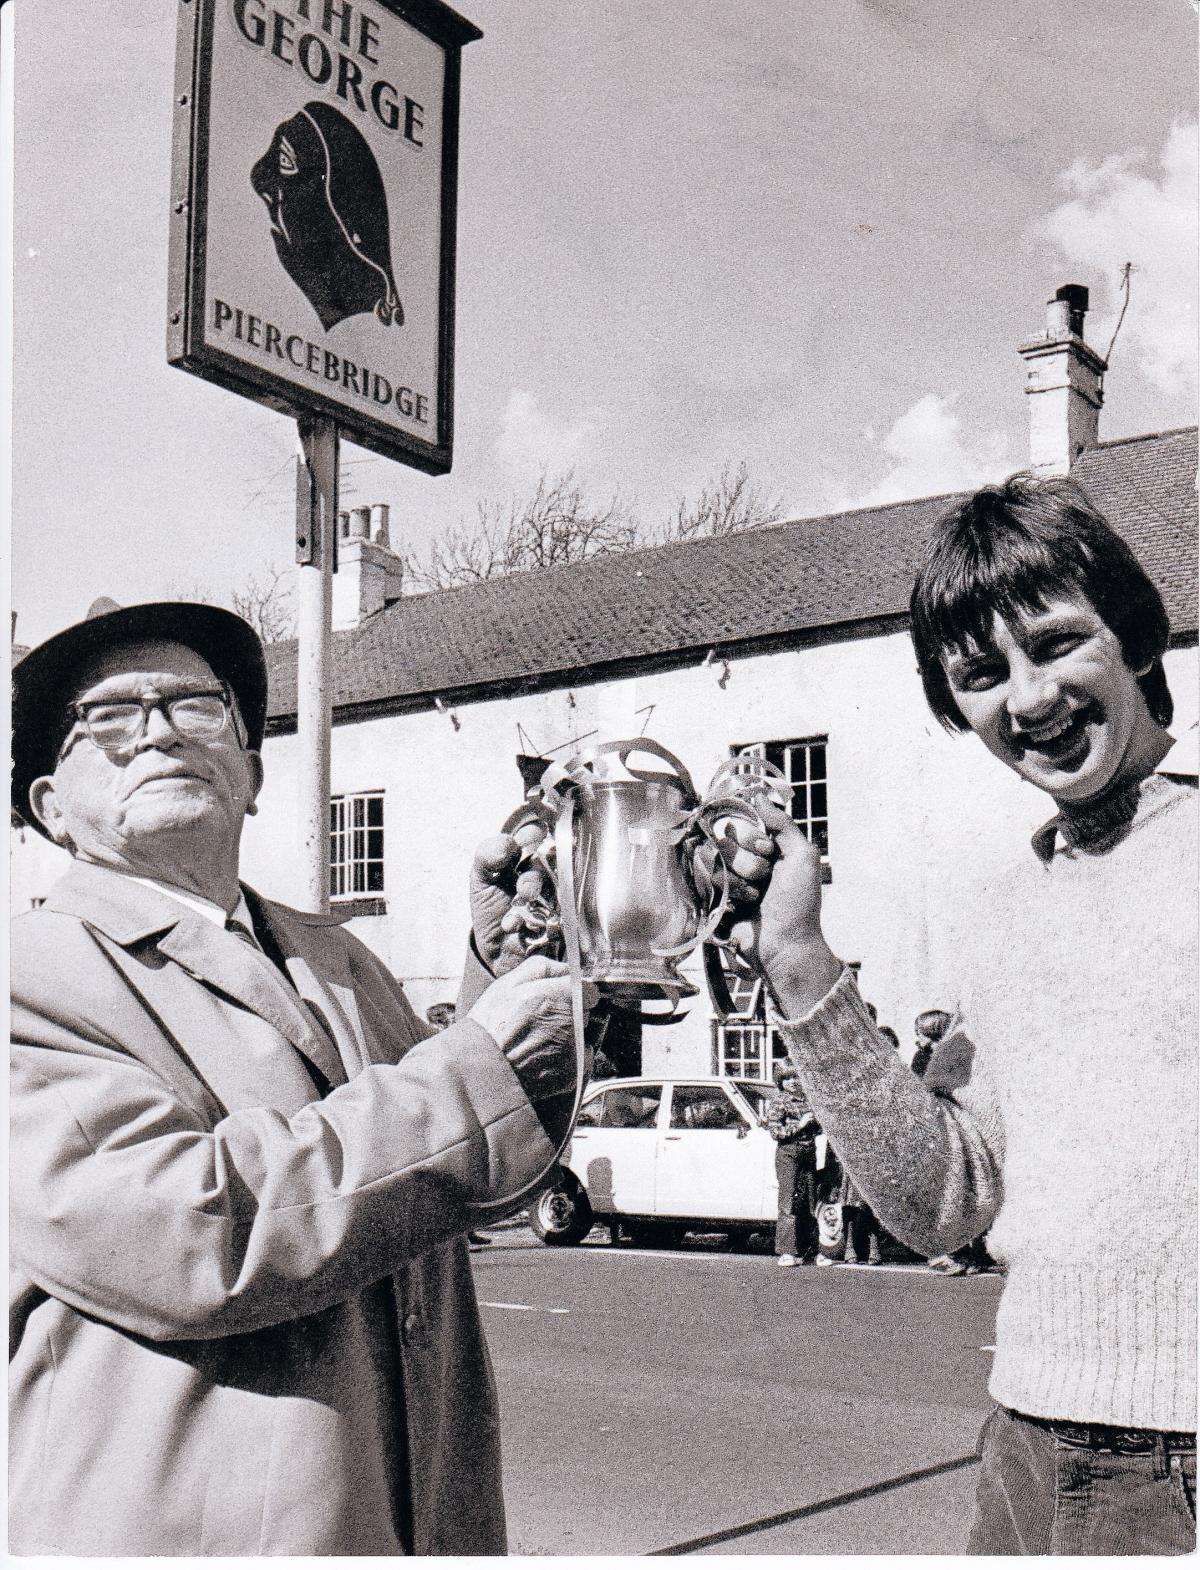 The 84-year-old Gainford businessman Henry Walton hands over the trophy to the 1980 winner, Nicky Longstaff, outside The George Hotel. Henry Walton gave his name to the Easter Monday event, but it no longer appears to take place